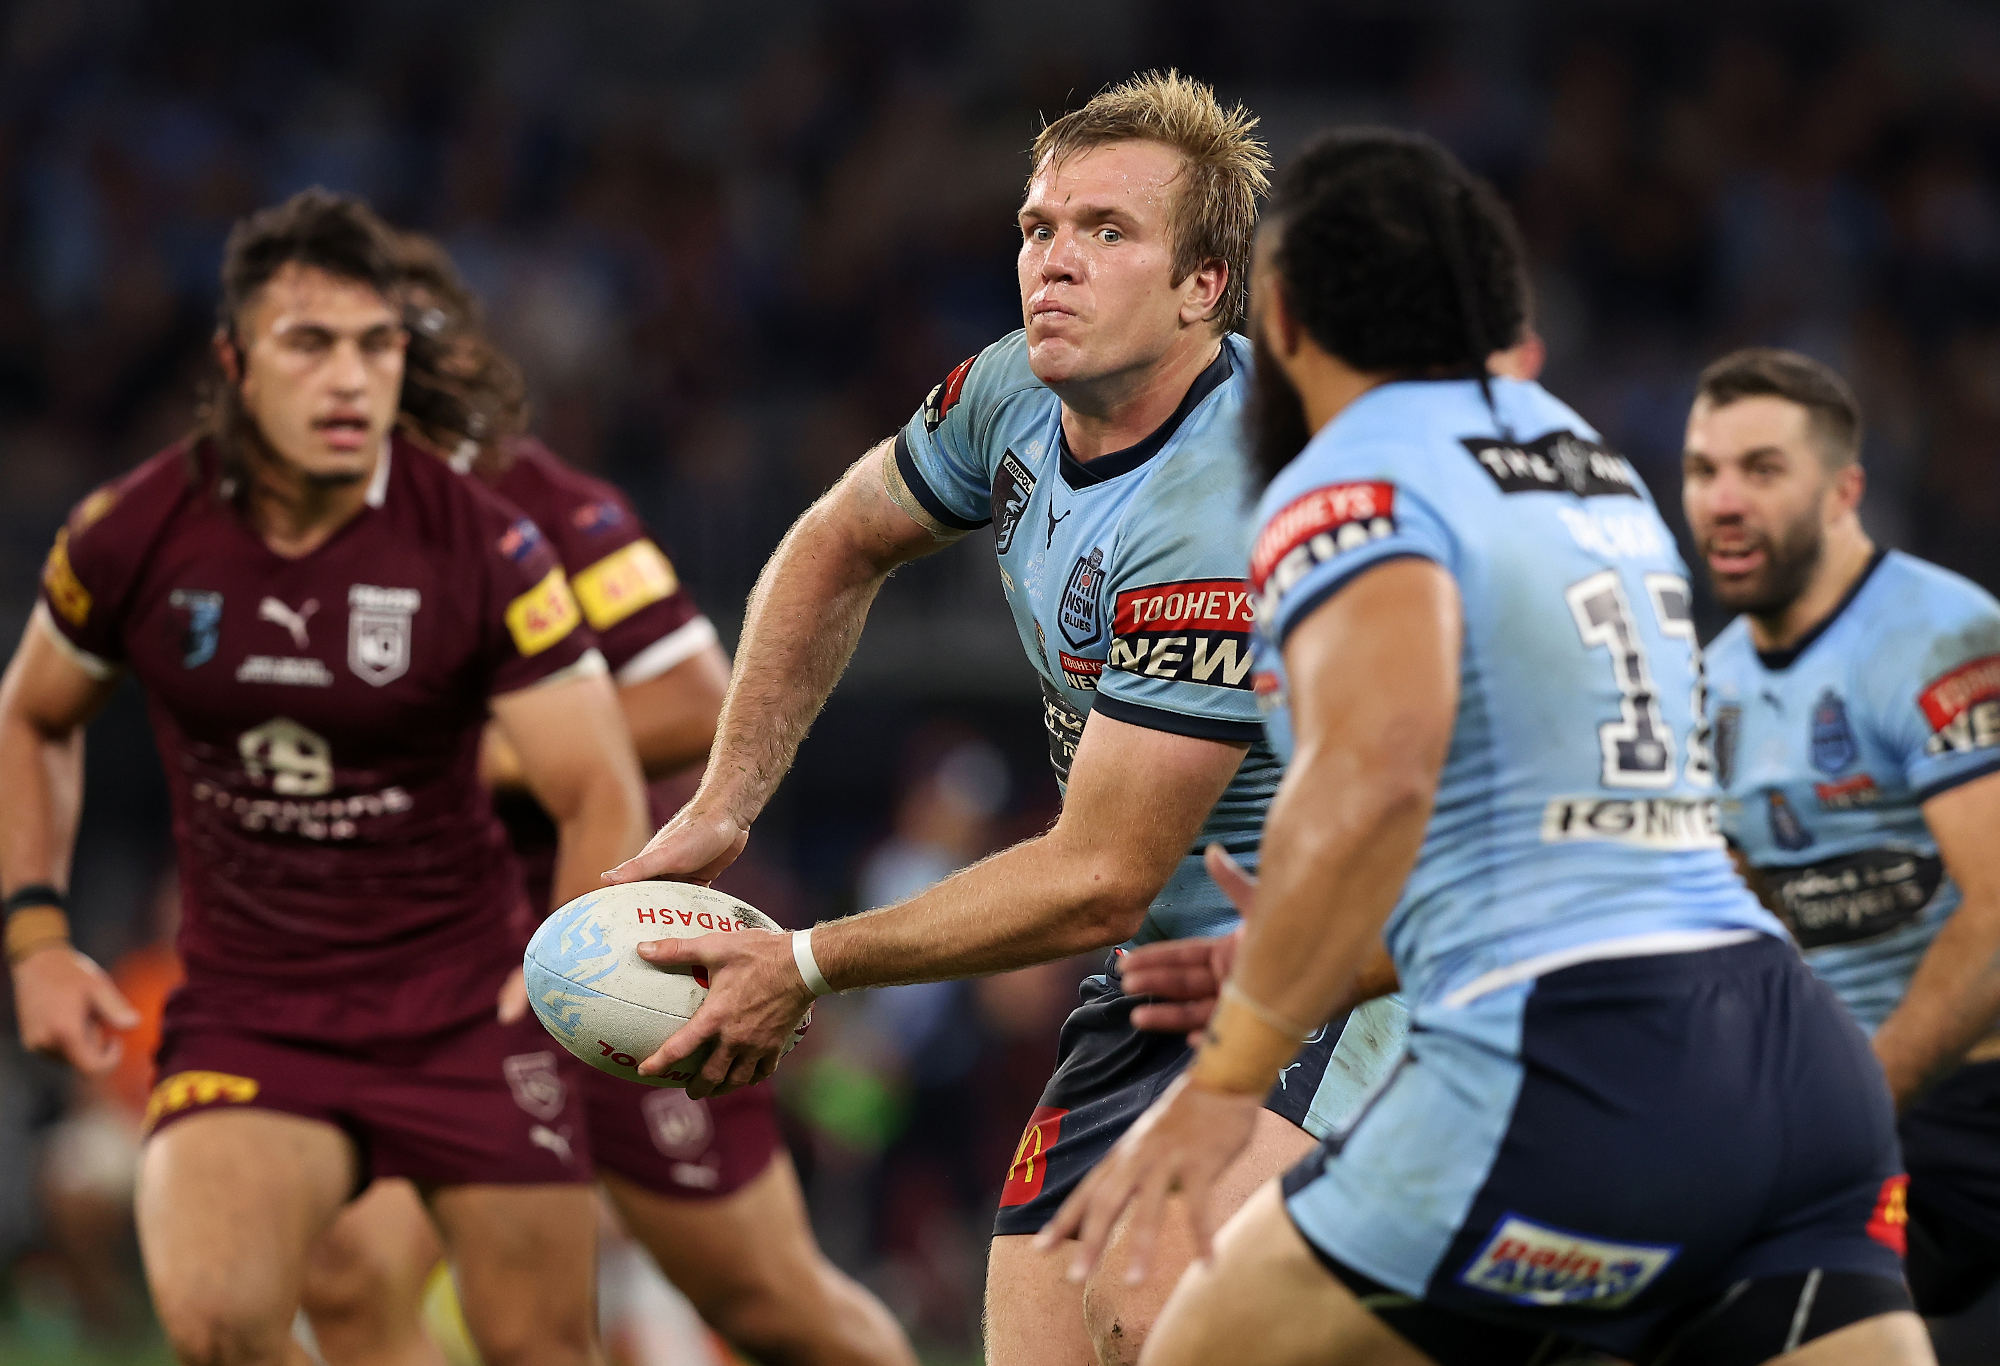 Jake Trbojevic looks to pass the ball during game two of the State of Origin series between New South Wales Blues and Queensland Maroons at Optus Stadium, on June 26, 2022, in Perth, Australia. (Photo by Paul Kane/Getty Images)